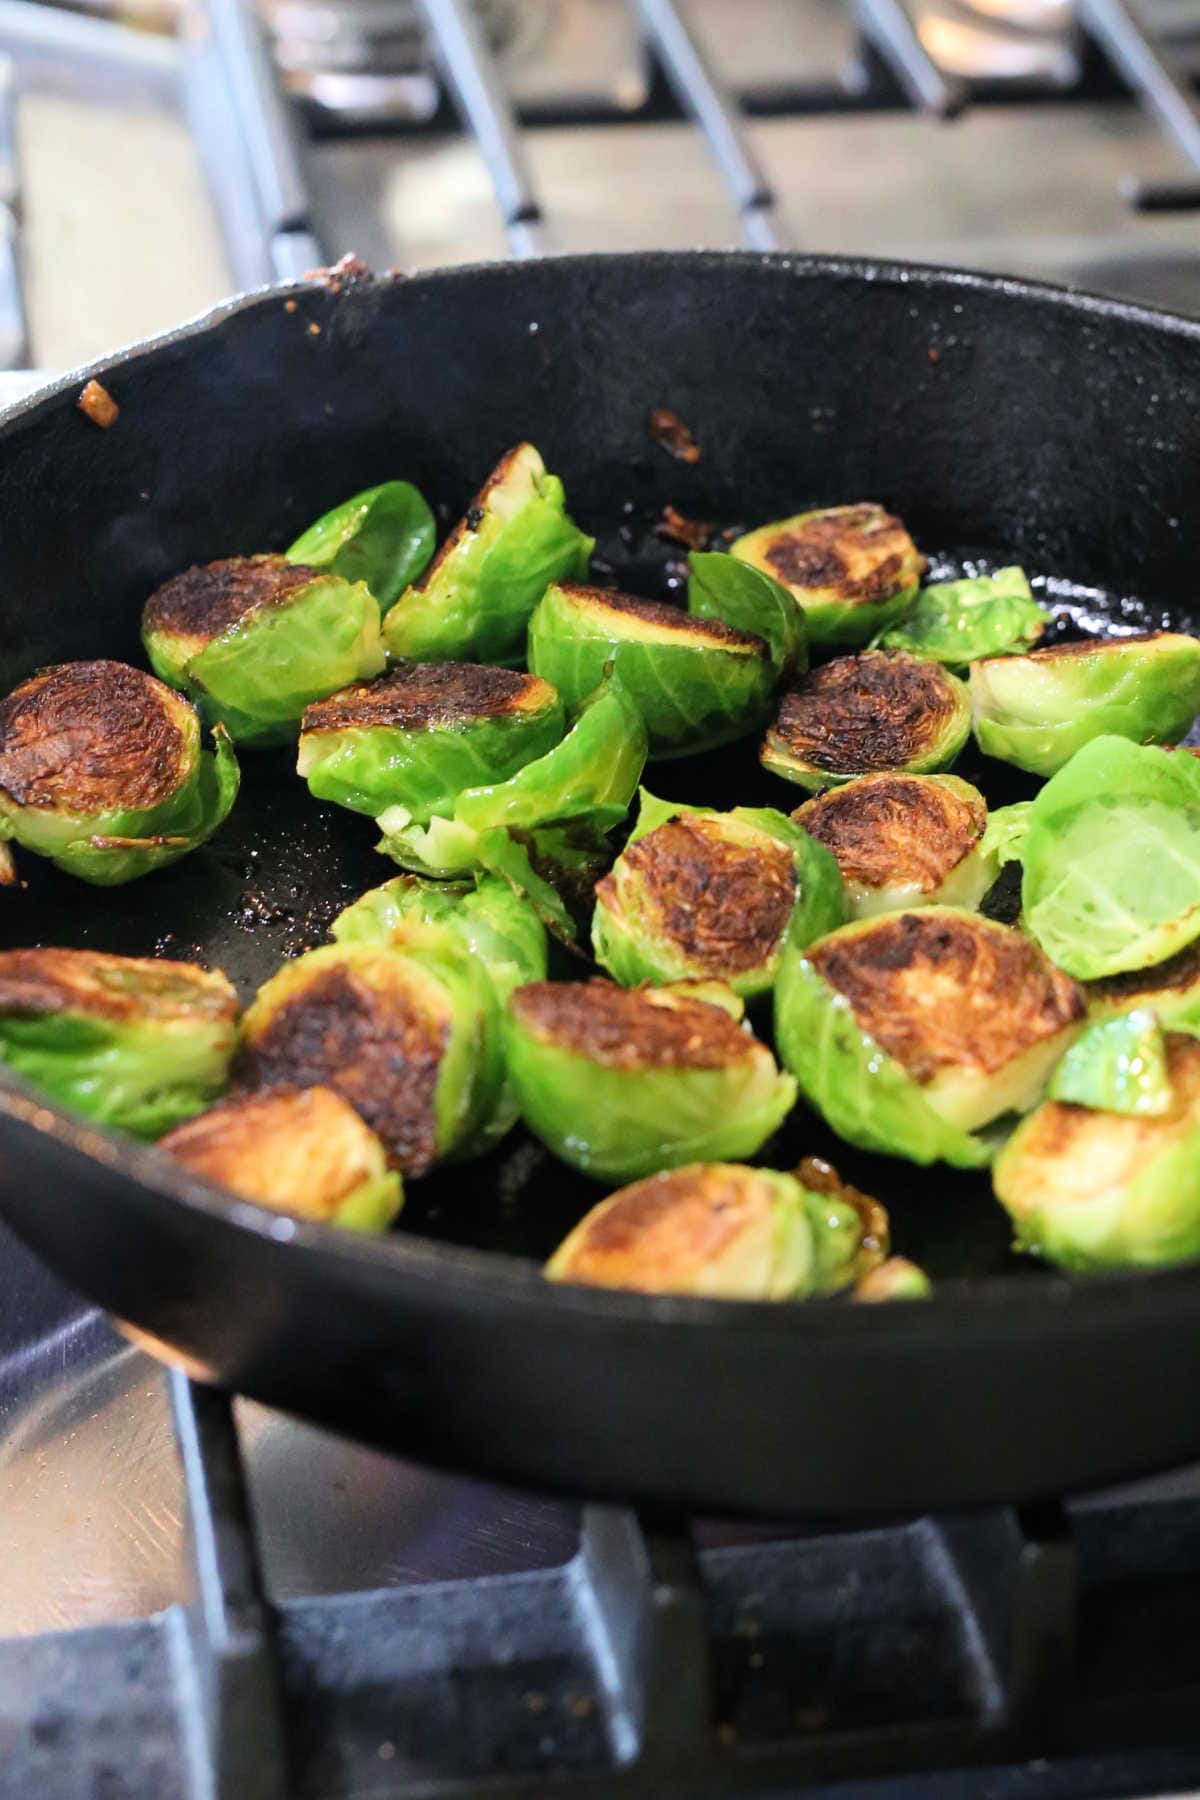 Pan fried brussel sprouts.